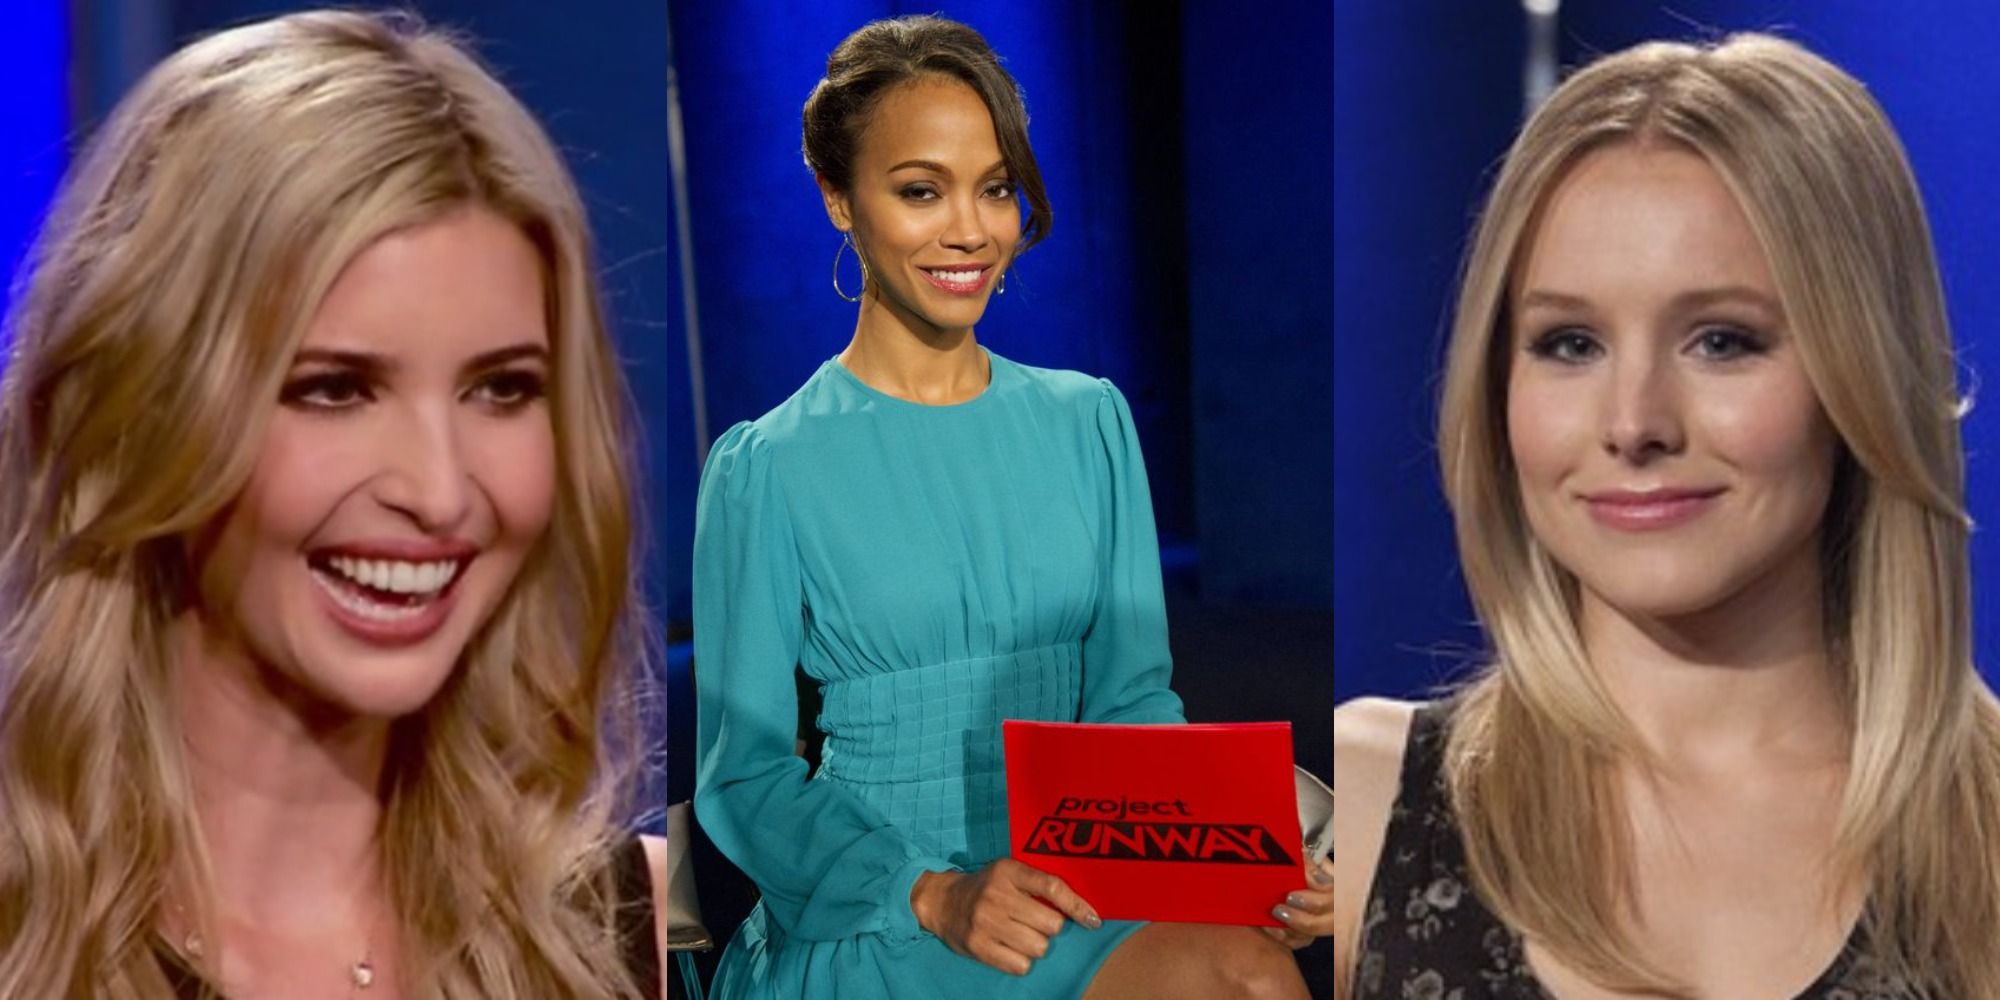 Ivanka Trump, Zoe Saldana and Kristen Bell in three side by side images from Project Runway